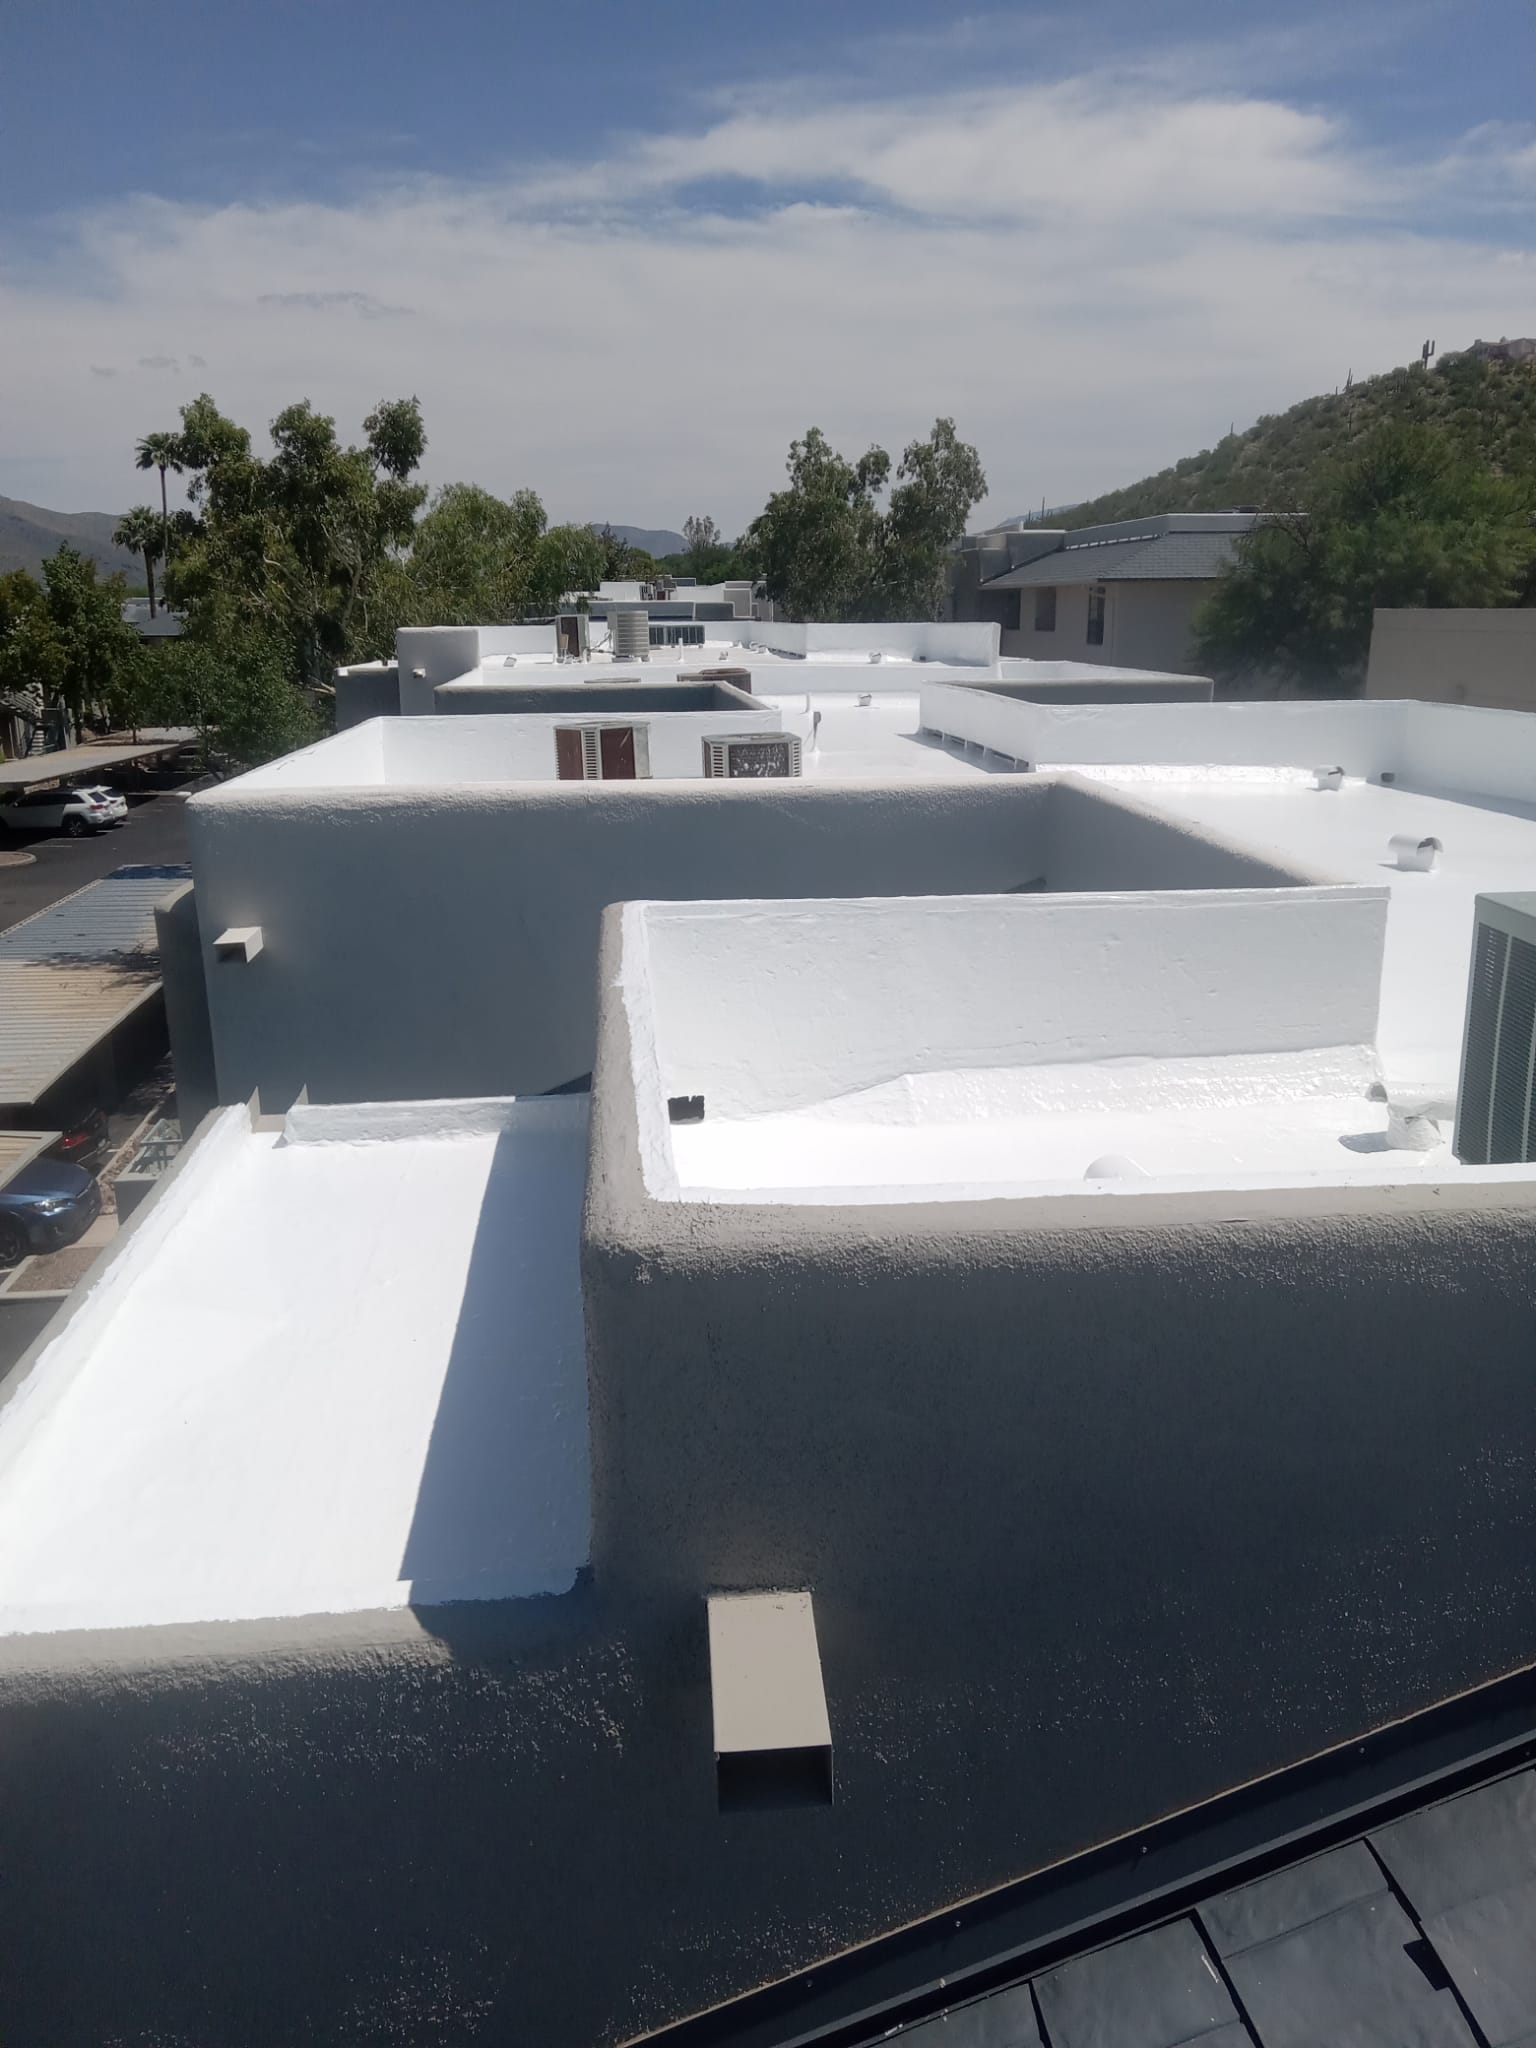 Multi-family residential building in Grayhawk recently upgraded with a spray foam roof.